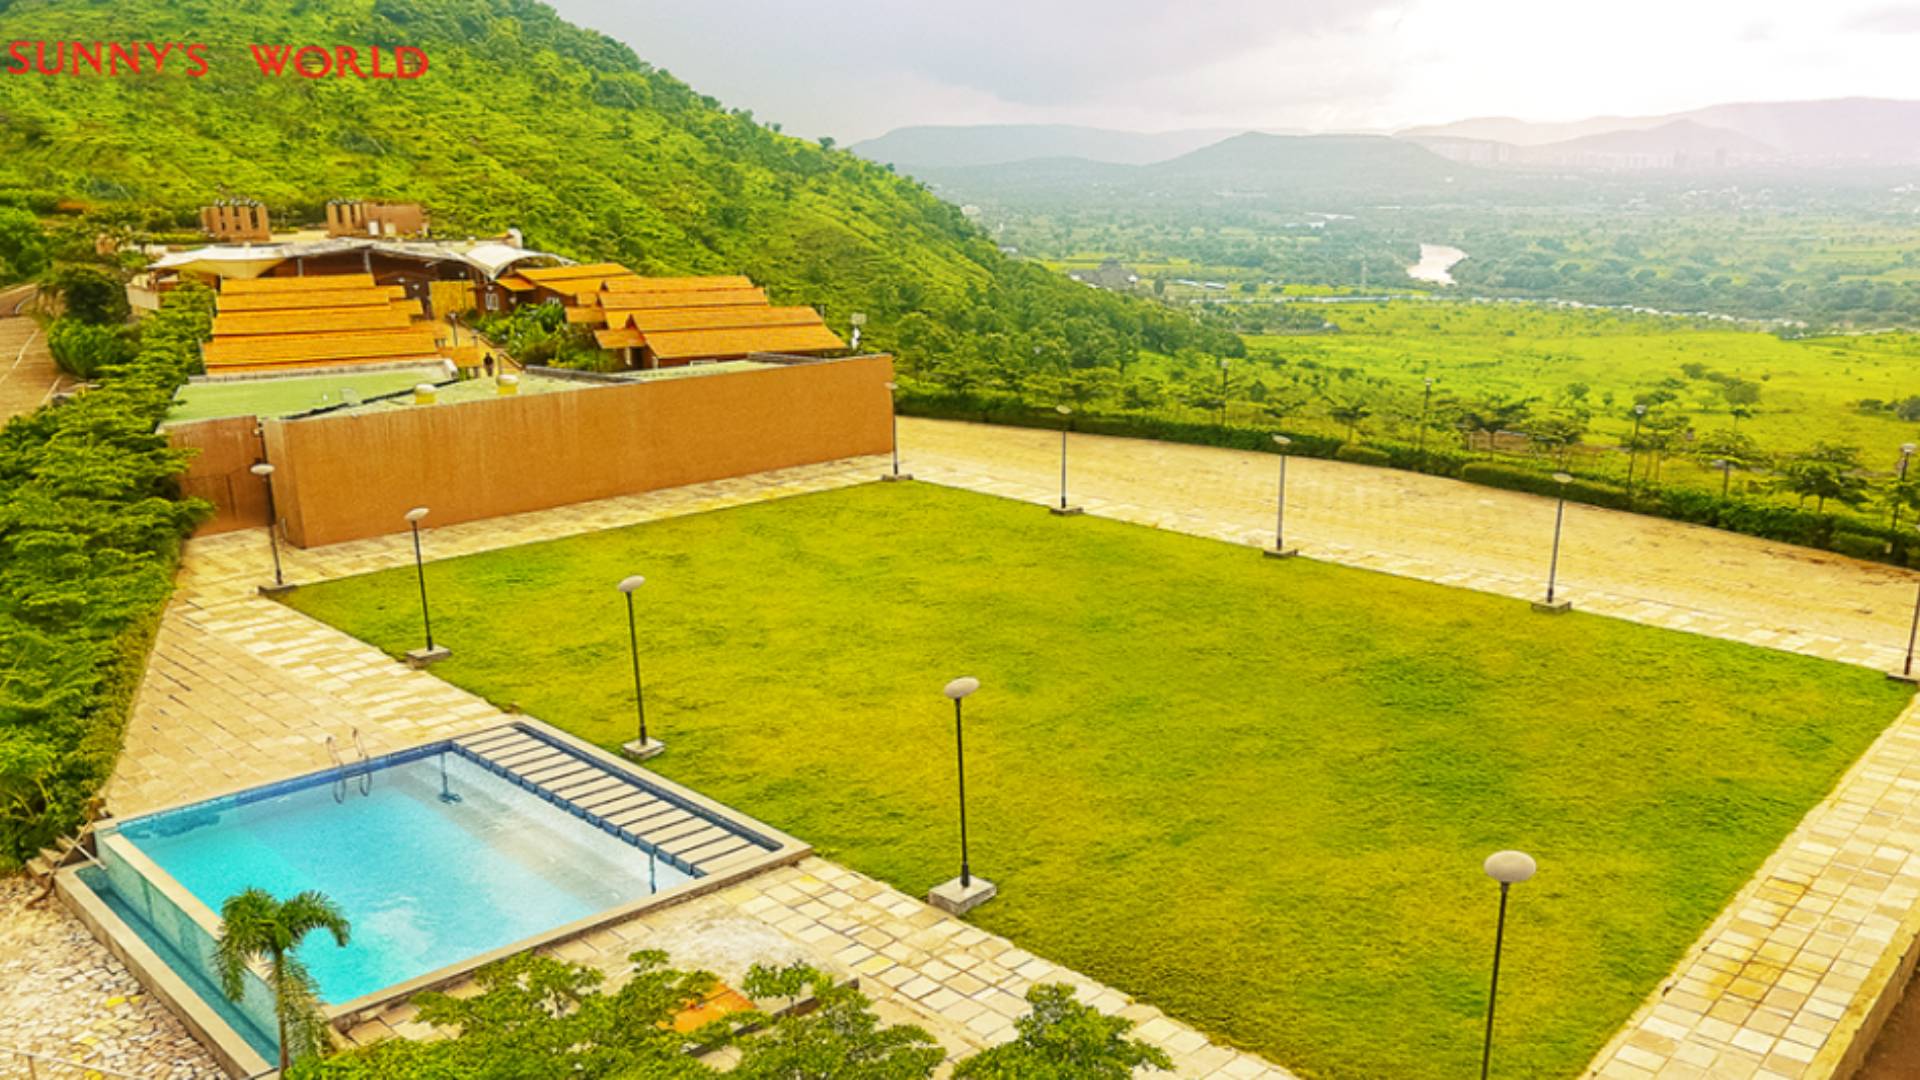 The Emerald - Hill Top Lawn With Infinity Pool at Sunny's World Pune (1)